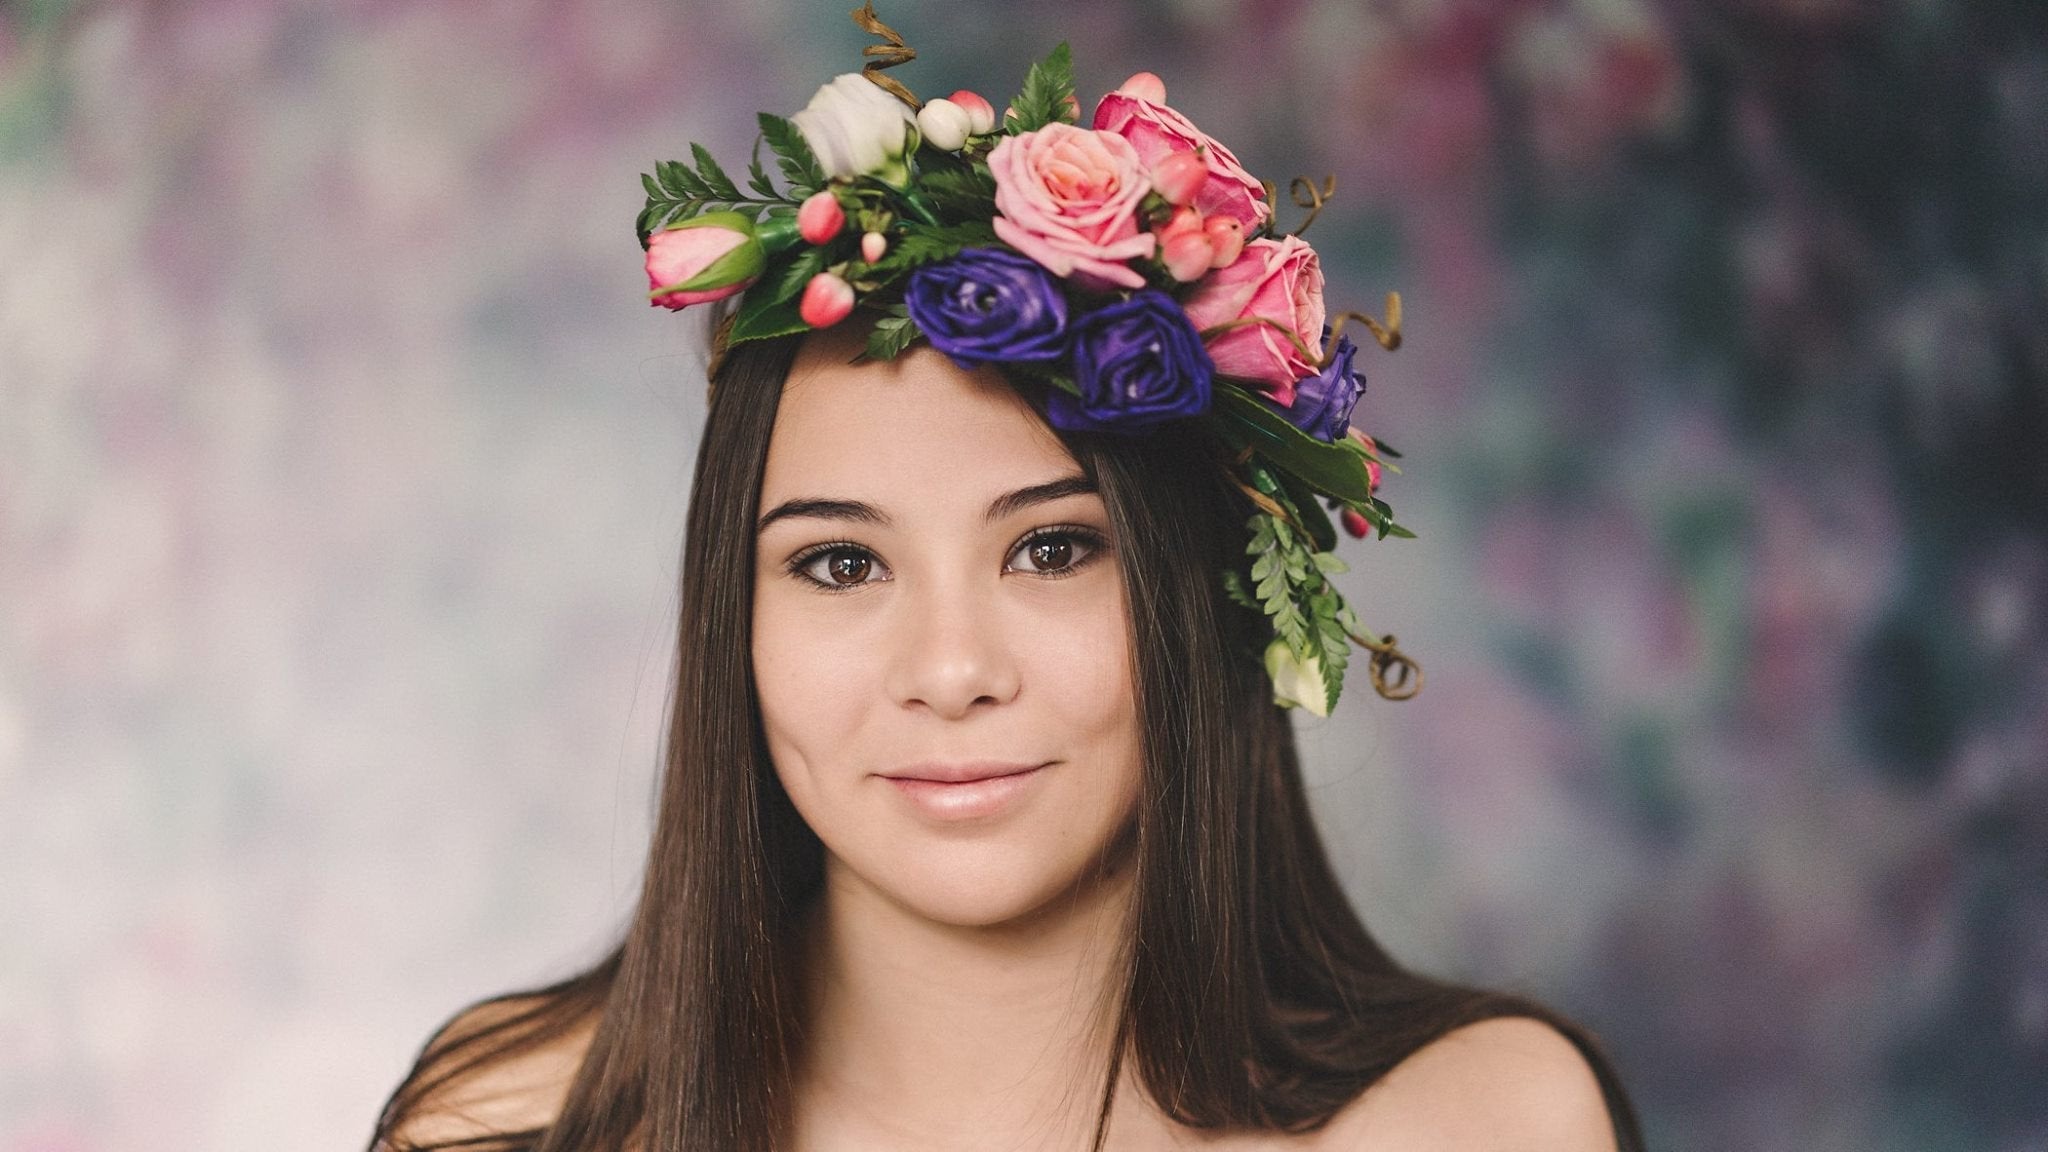 Katebackdrop：Kate Valentine's Day Pink Flowers Hand Painting Portrait Photography Backdrops